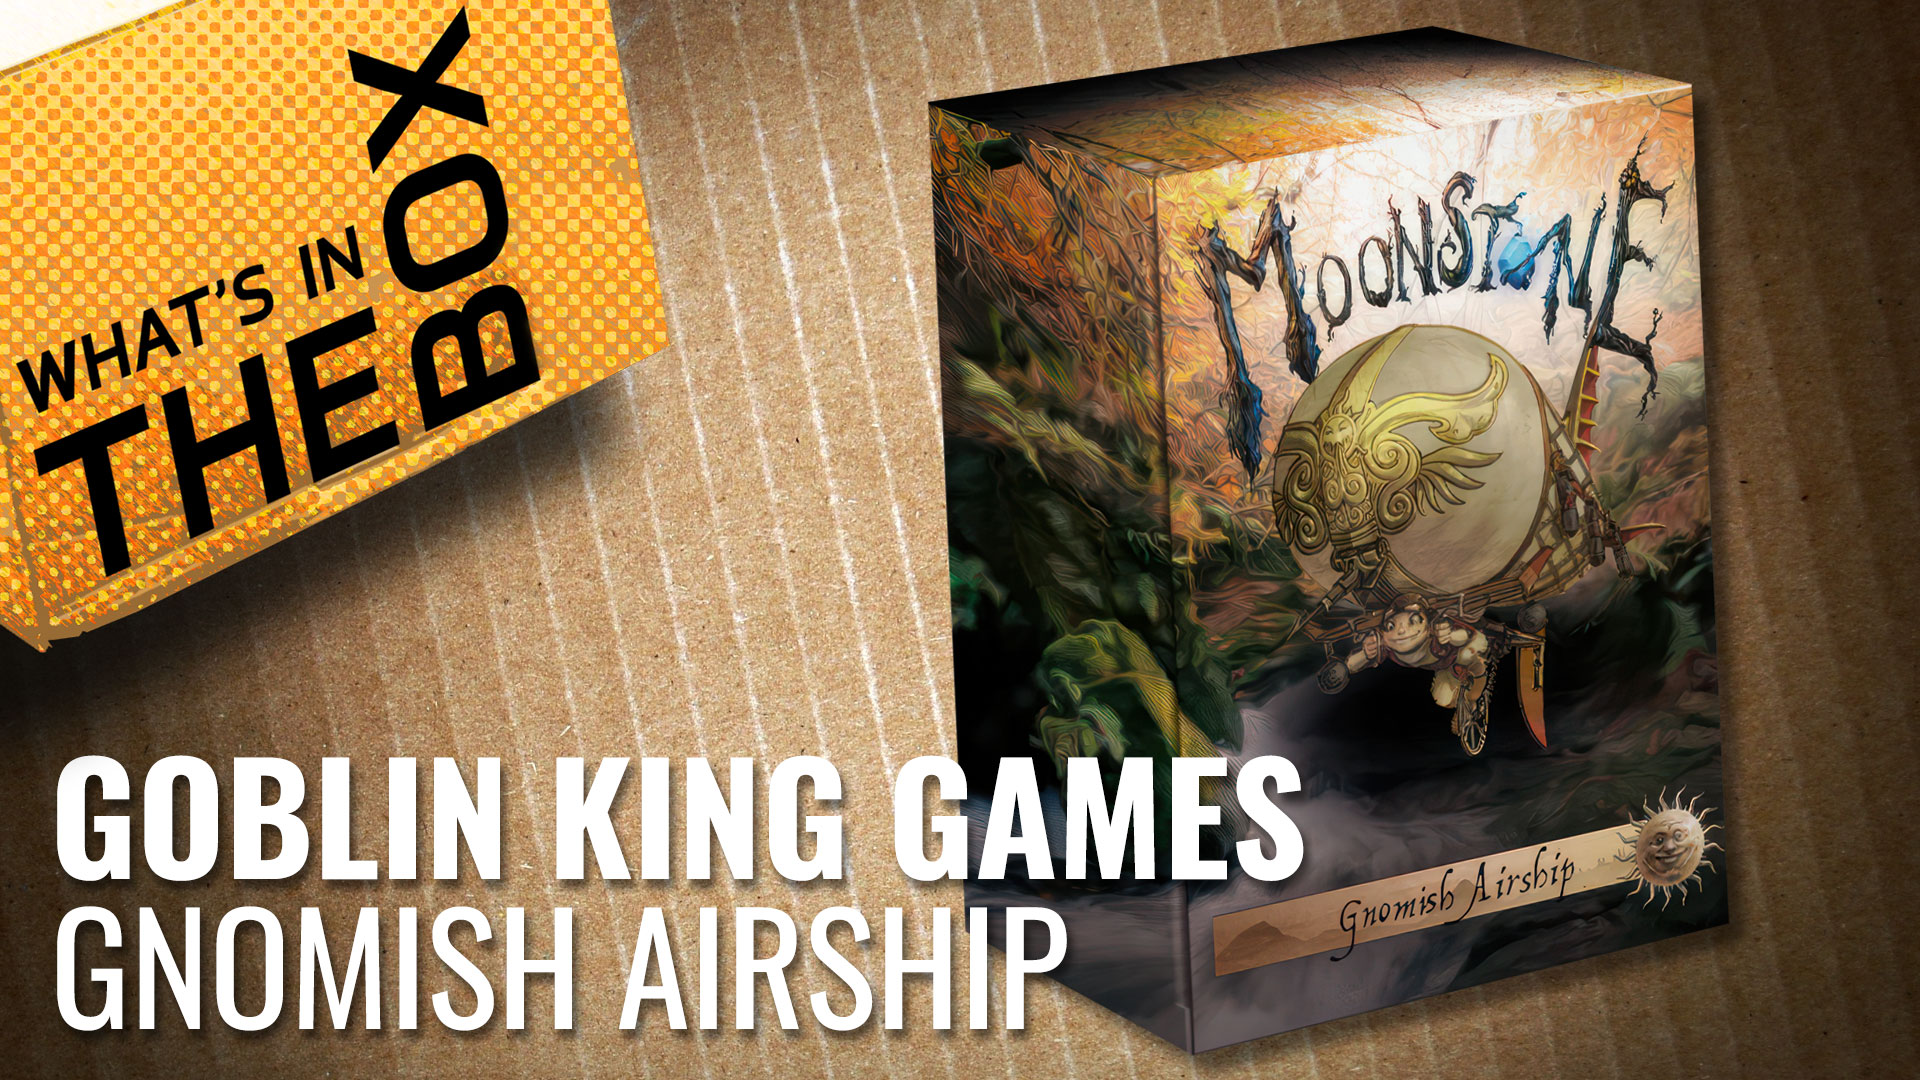 Unboxing-Gnomish-Airship_Goblin-King-Games-coverimage-V2